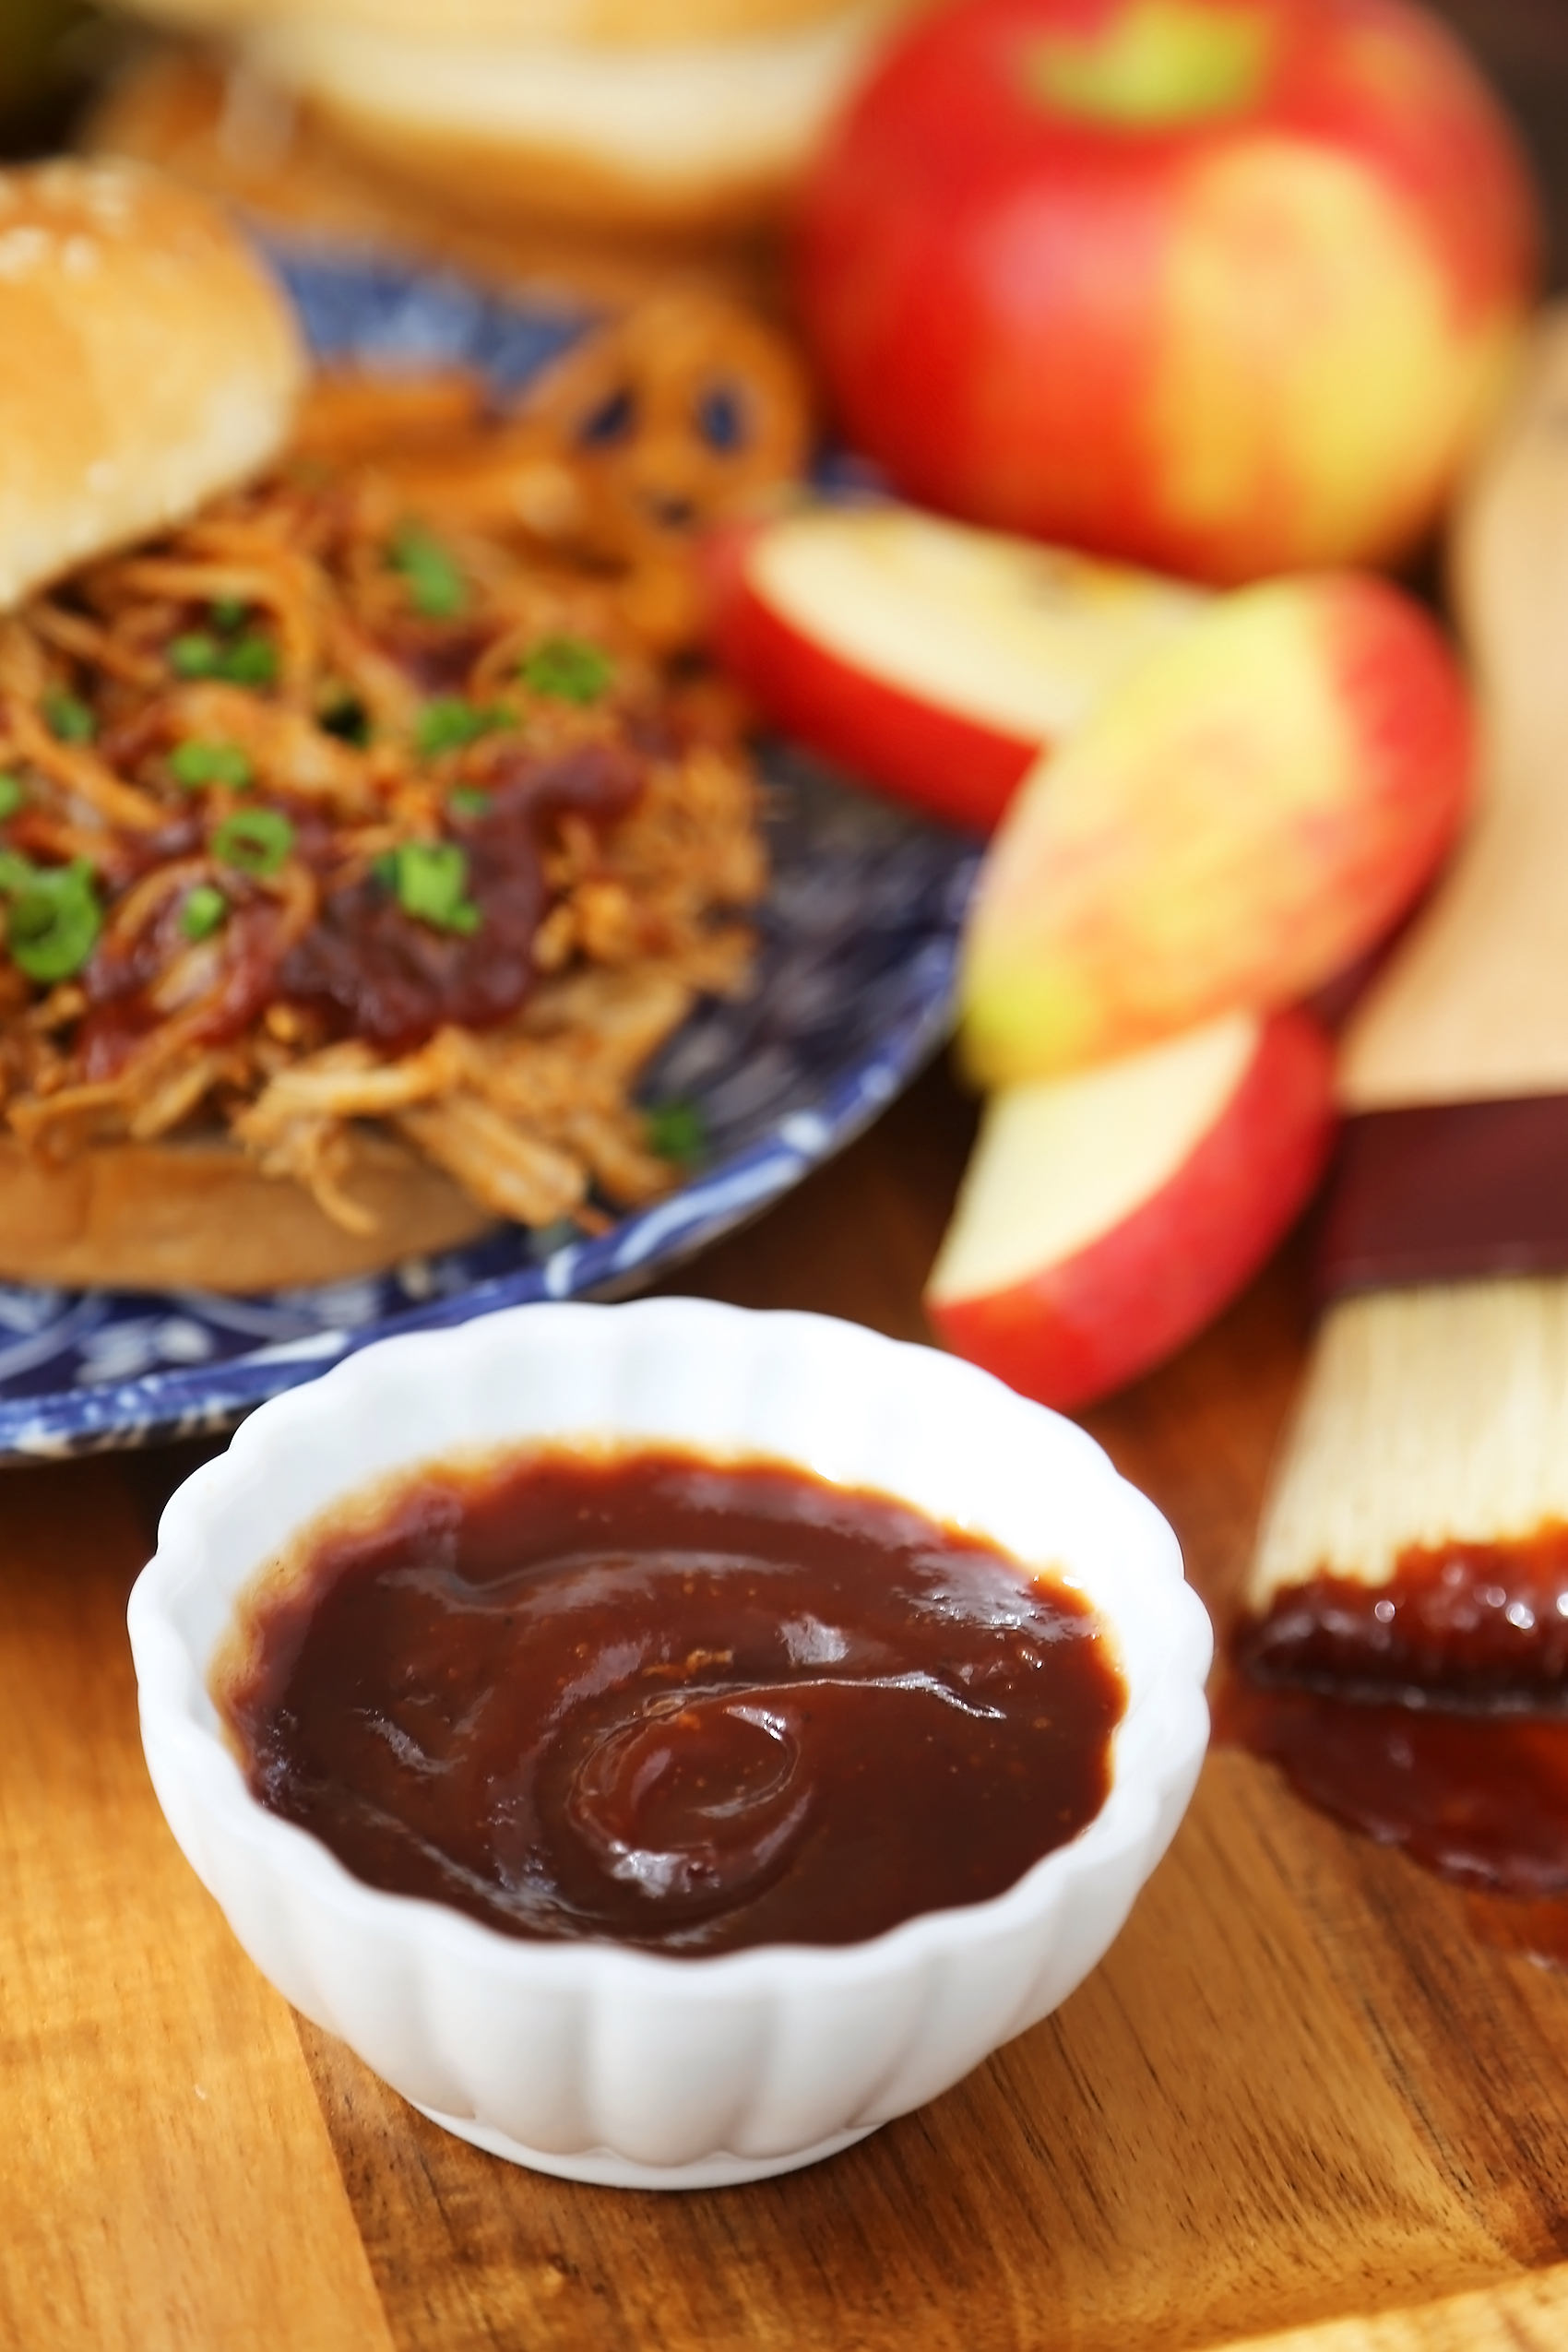 Slow Cooker Apple Cider BBQ Pulled Pork - Our best-ever pulled pork with a tangy, sweet apple cider BBQ sauce! Perfect slow cooker food for weeknight dinners or hungry crowds. thecomfortofcooking.com